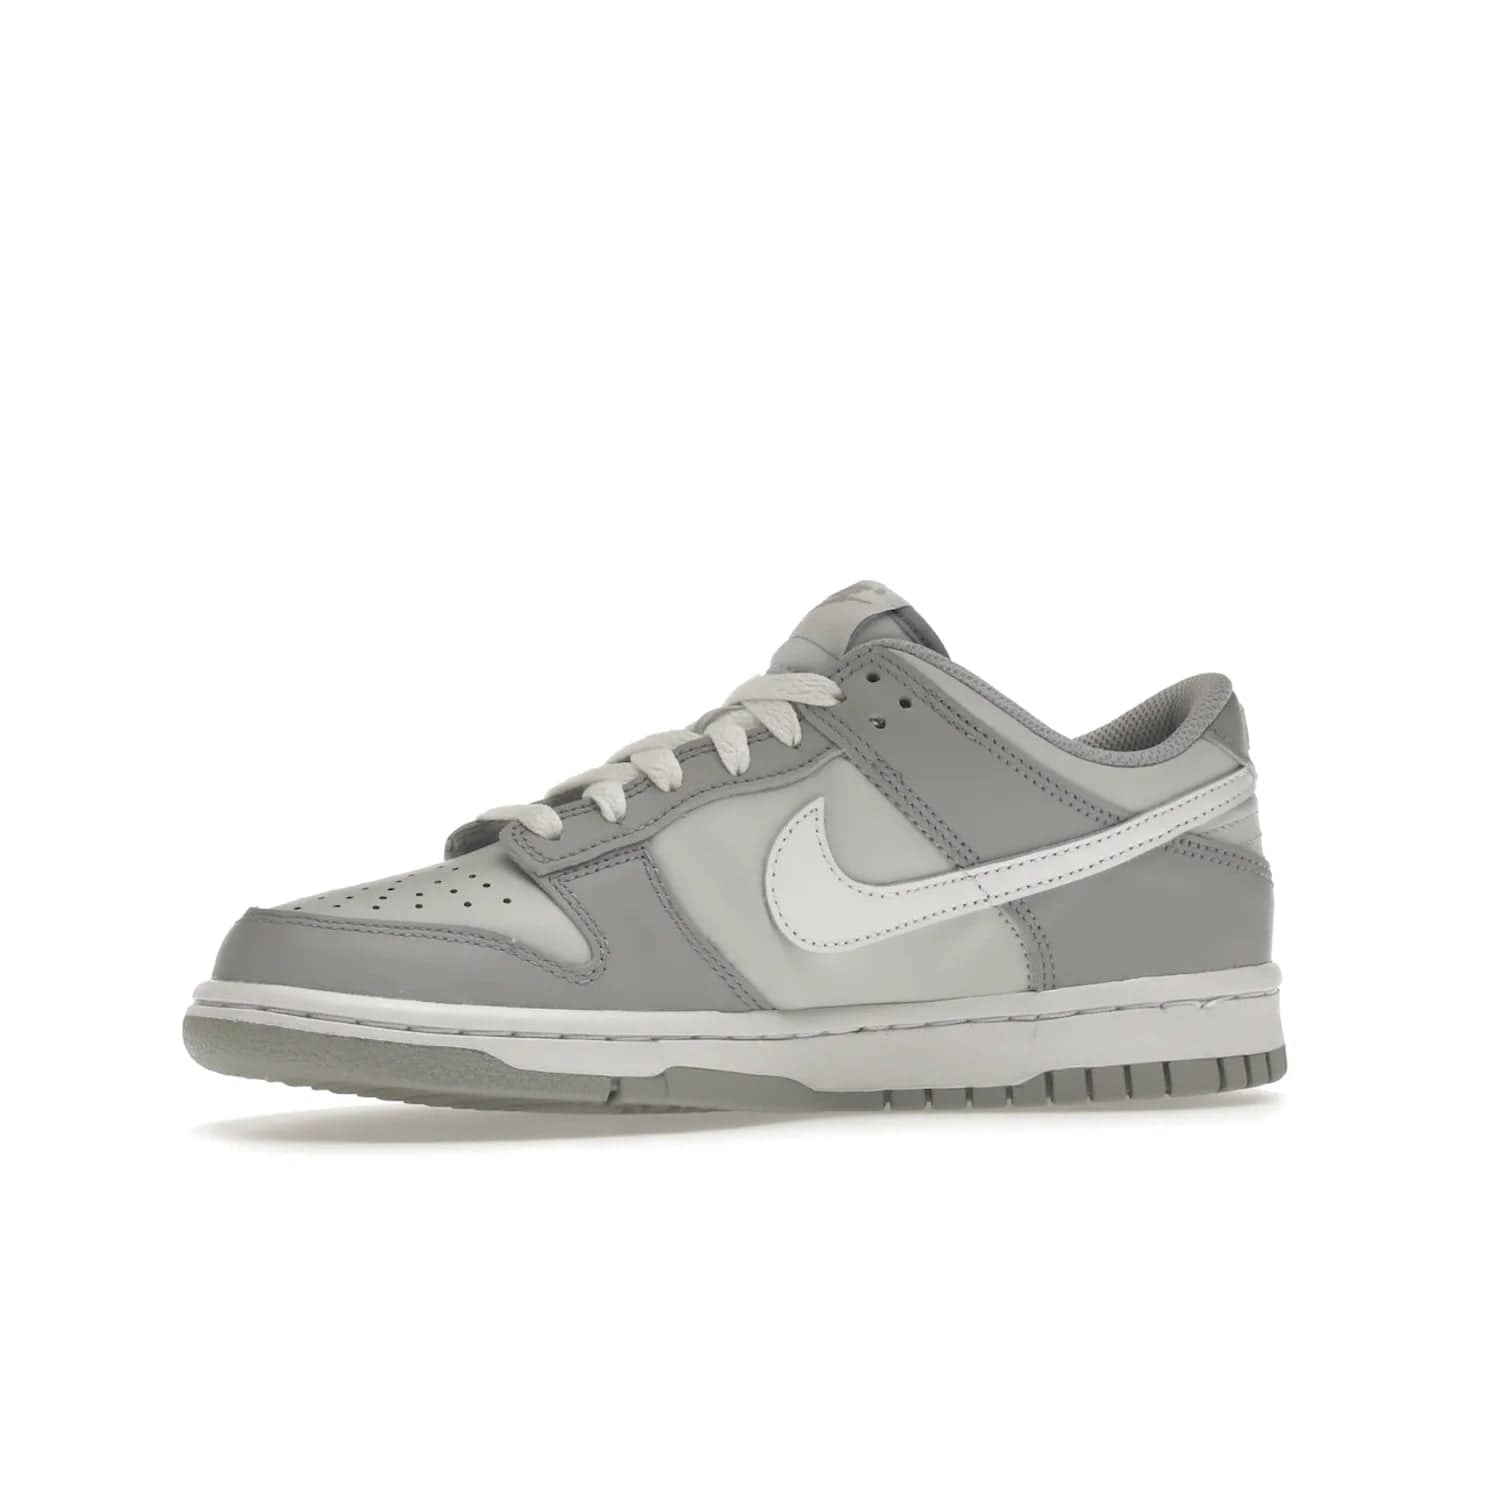 Nike Dunk Low Two-Toned Grey (GS) - Image 17 - Only at www.BallersClubKickz.com - Stylish Nike Dunk Low GS Two-Toned Grey featuring leather build, light/dark grey shades, white Swoosh logo & gray rubber outsole. Get ready to make a statement with this timeless classic released in March 2022.